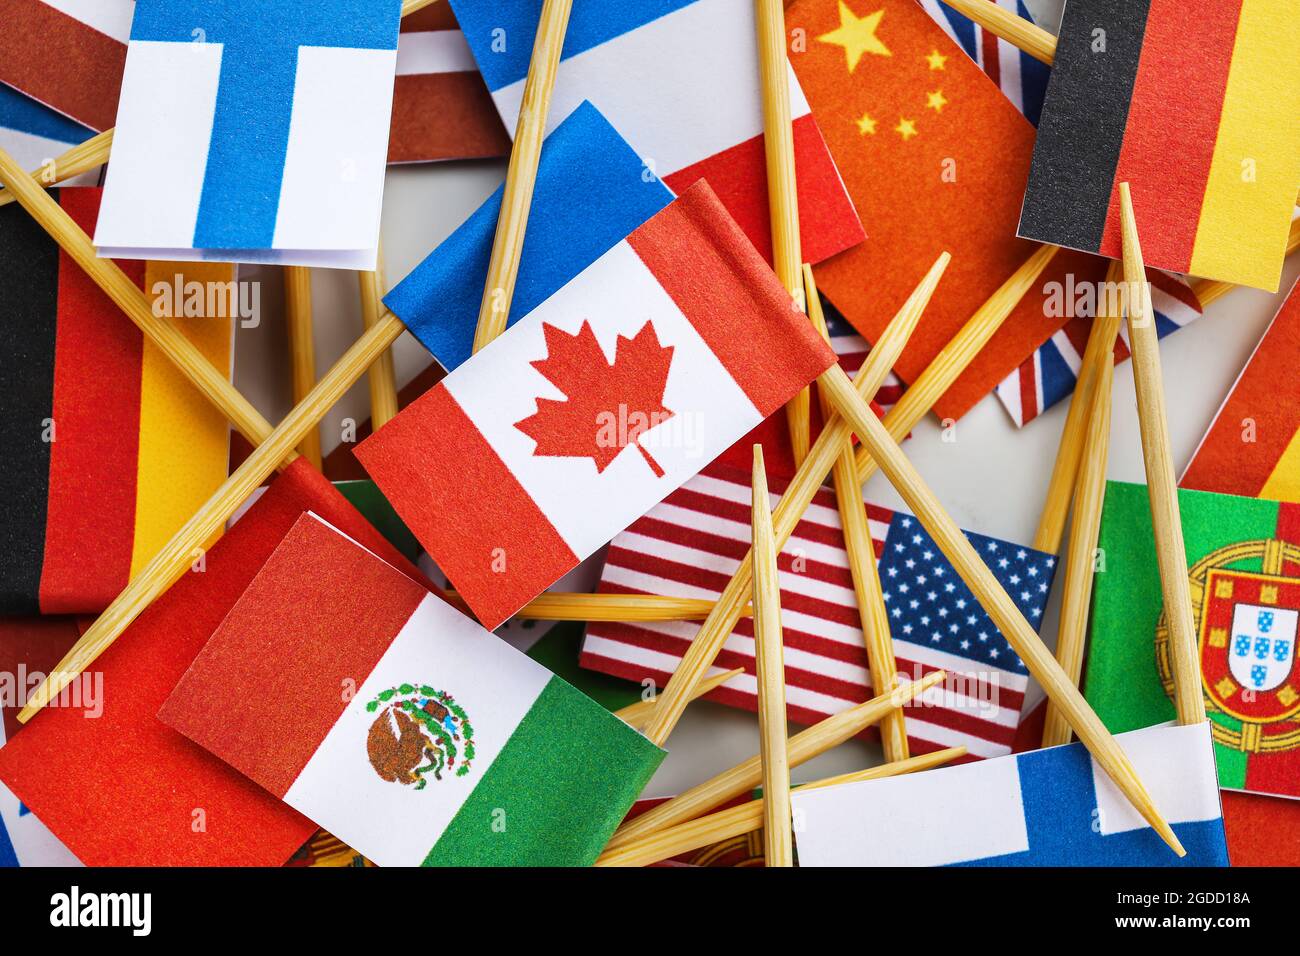 Many flags of different countries as background Stock Photo